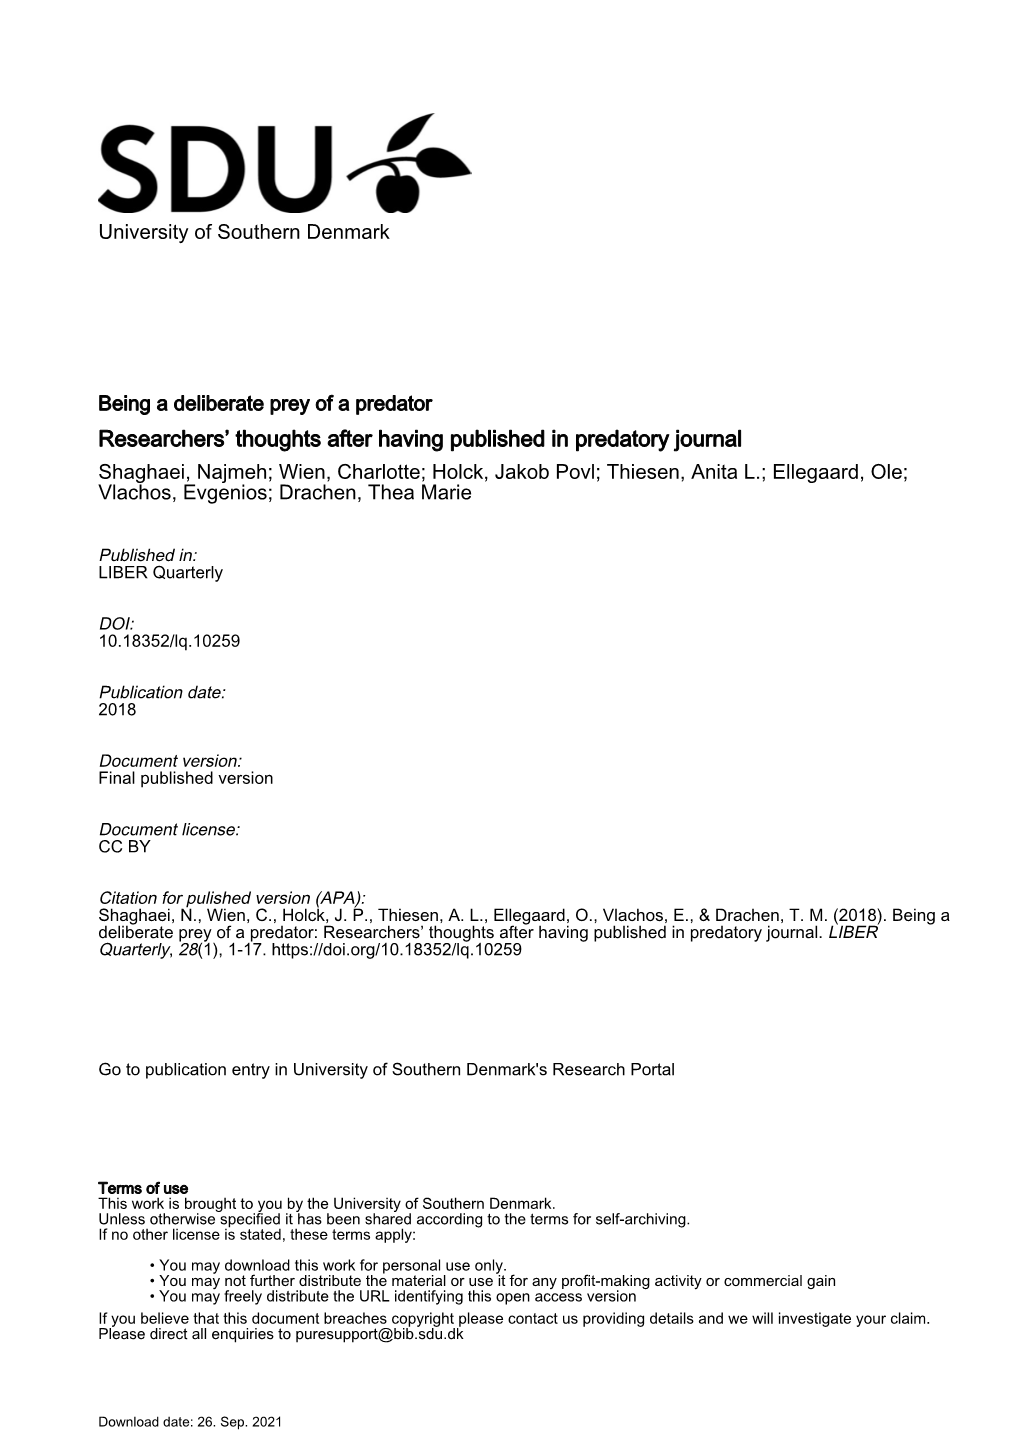 Researchers' Thoughts After Having Published in Predatory Journal